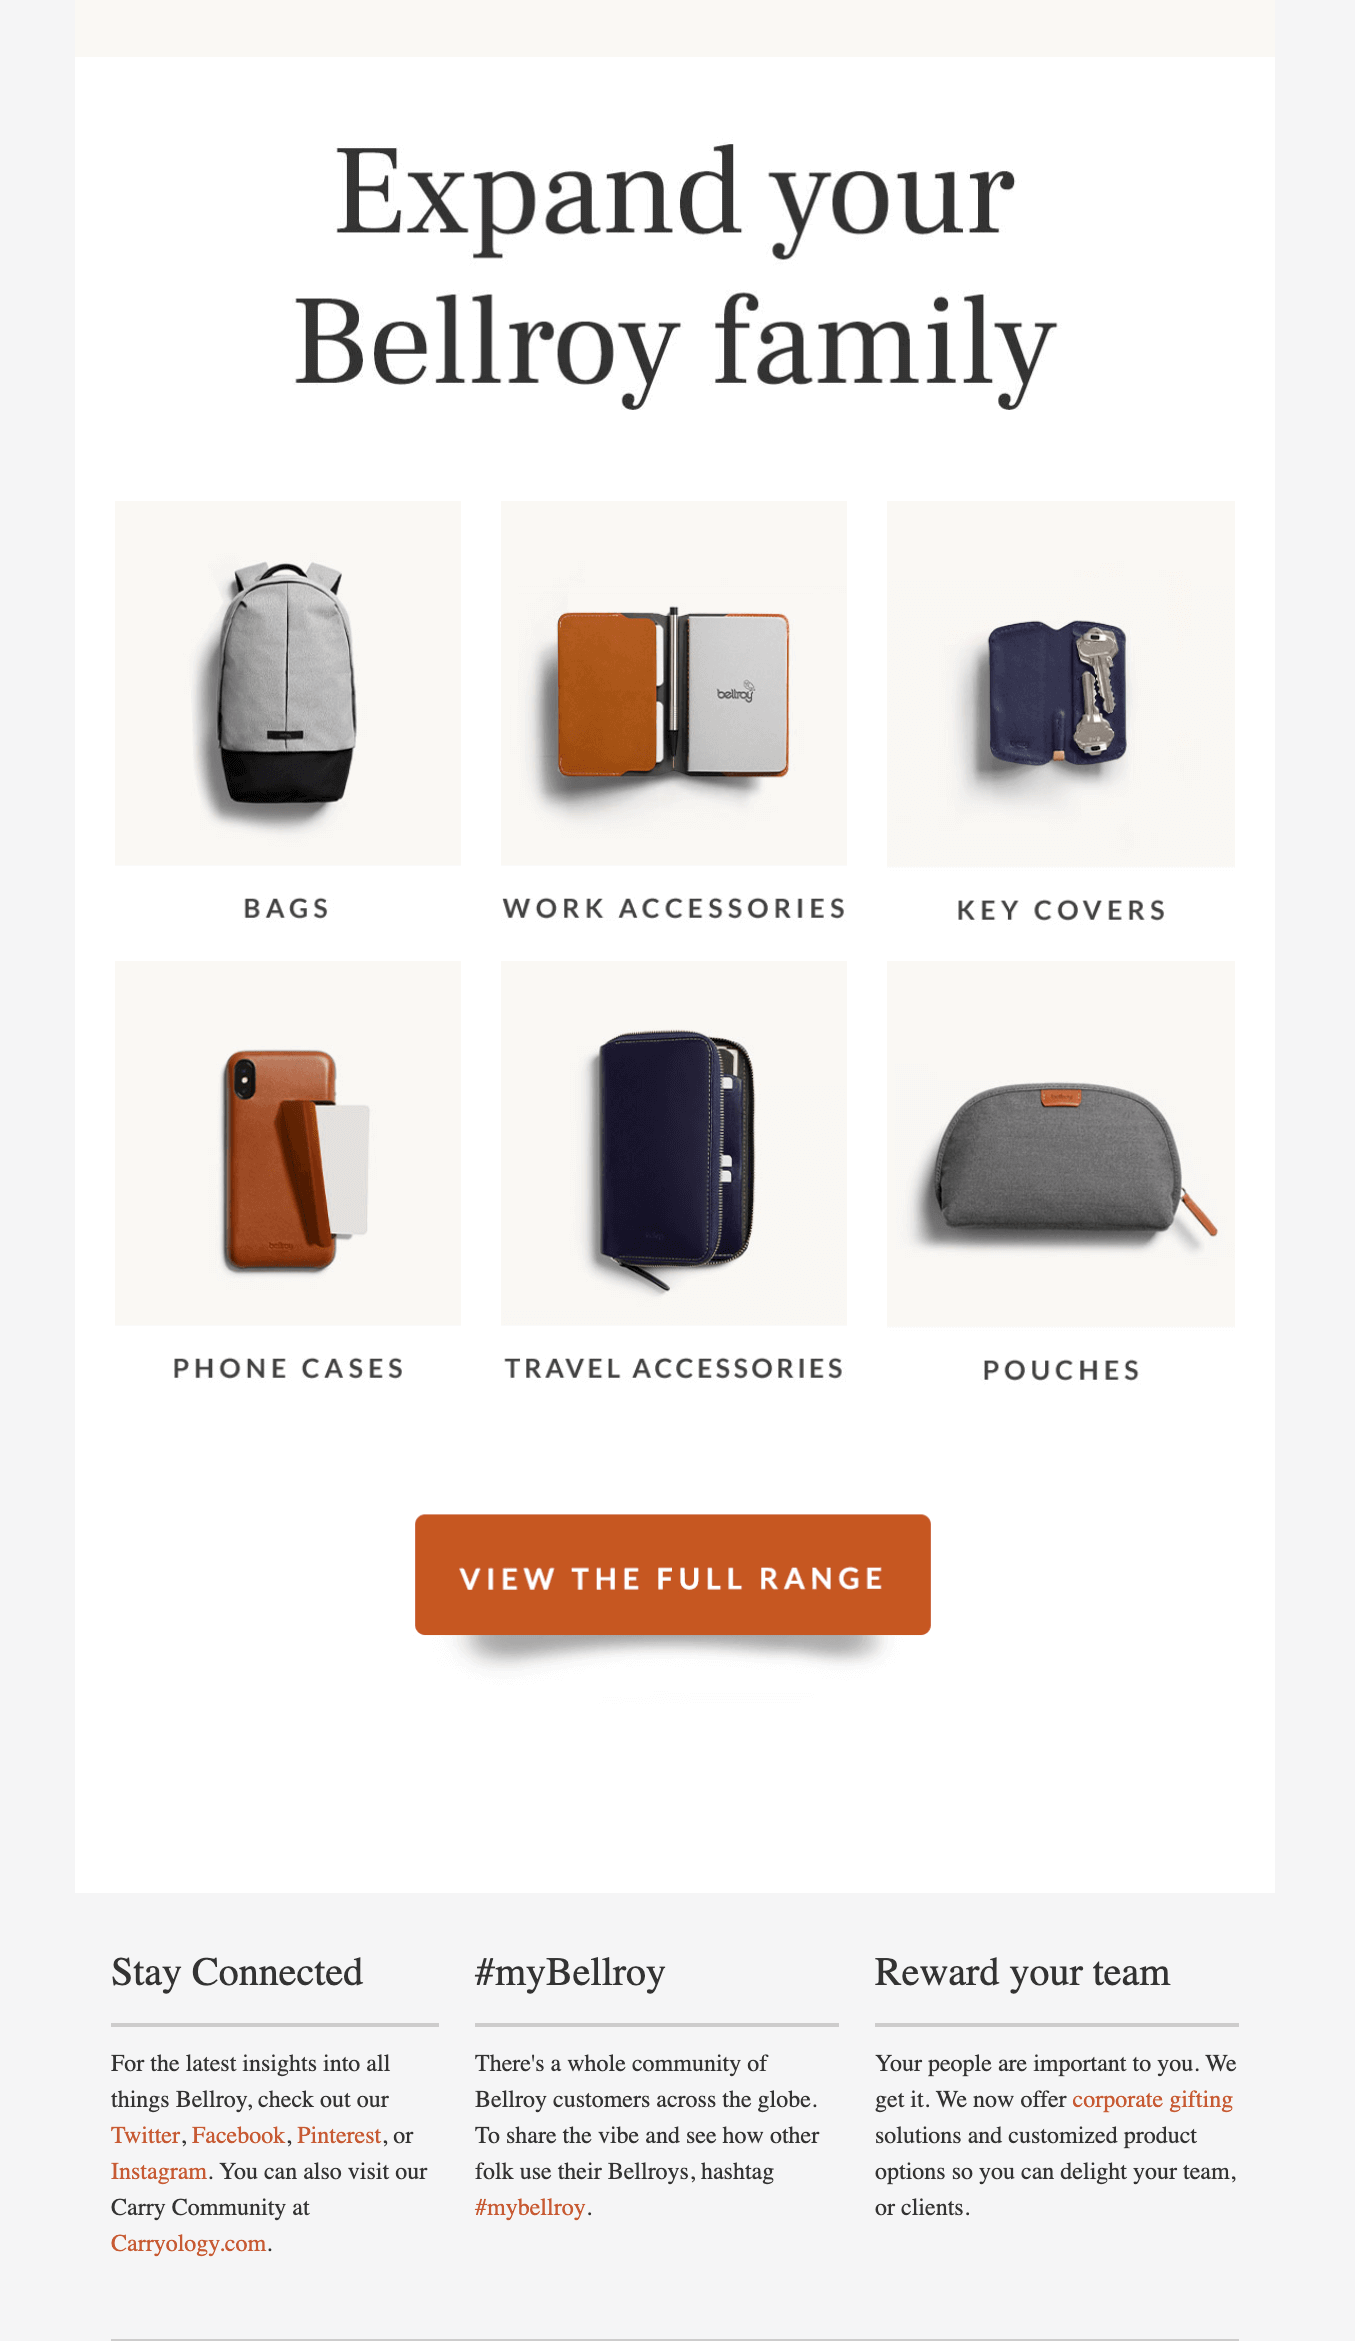 Recommendation message from Bellroy